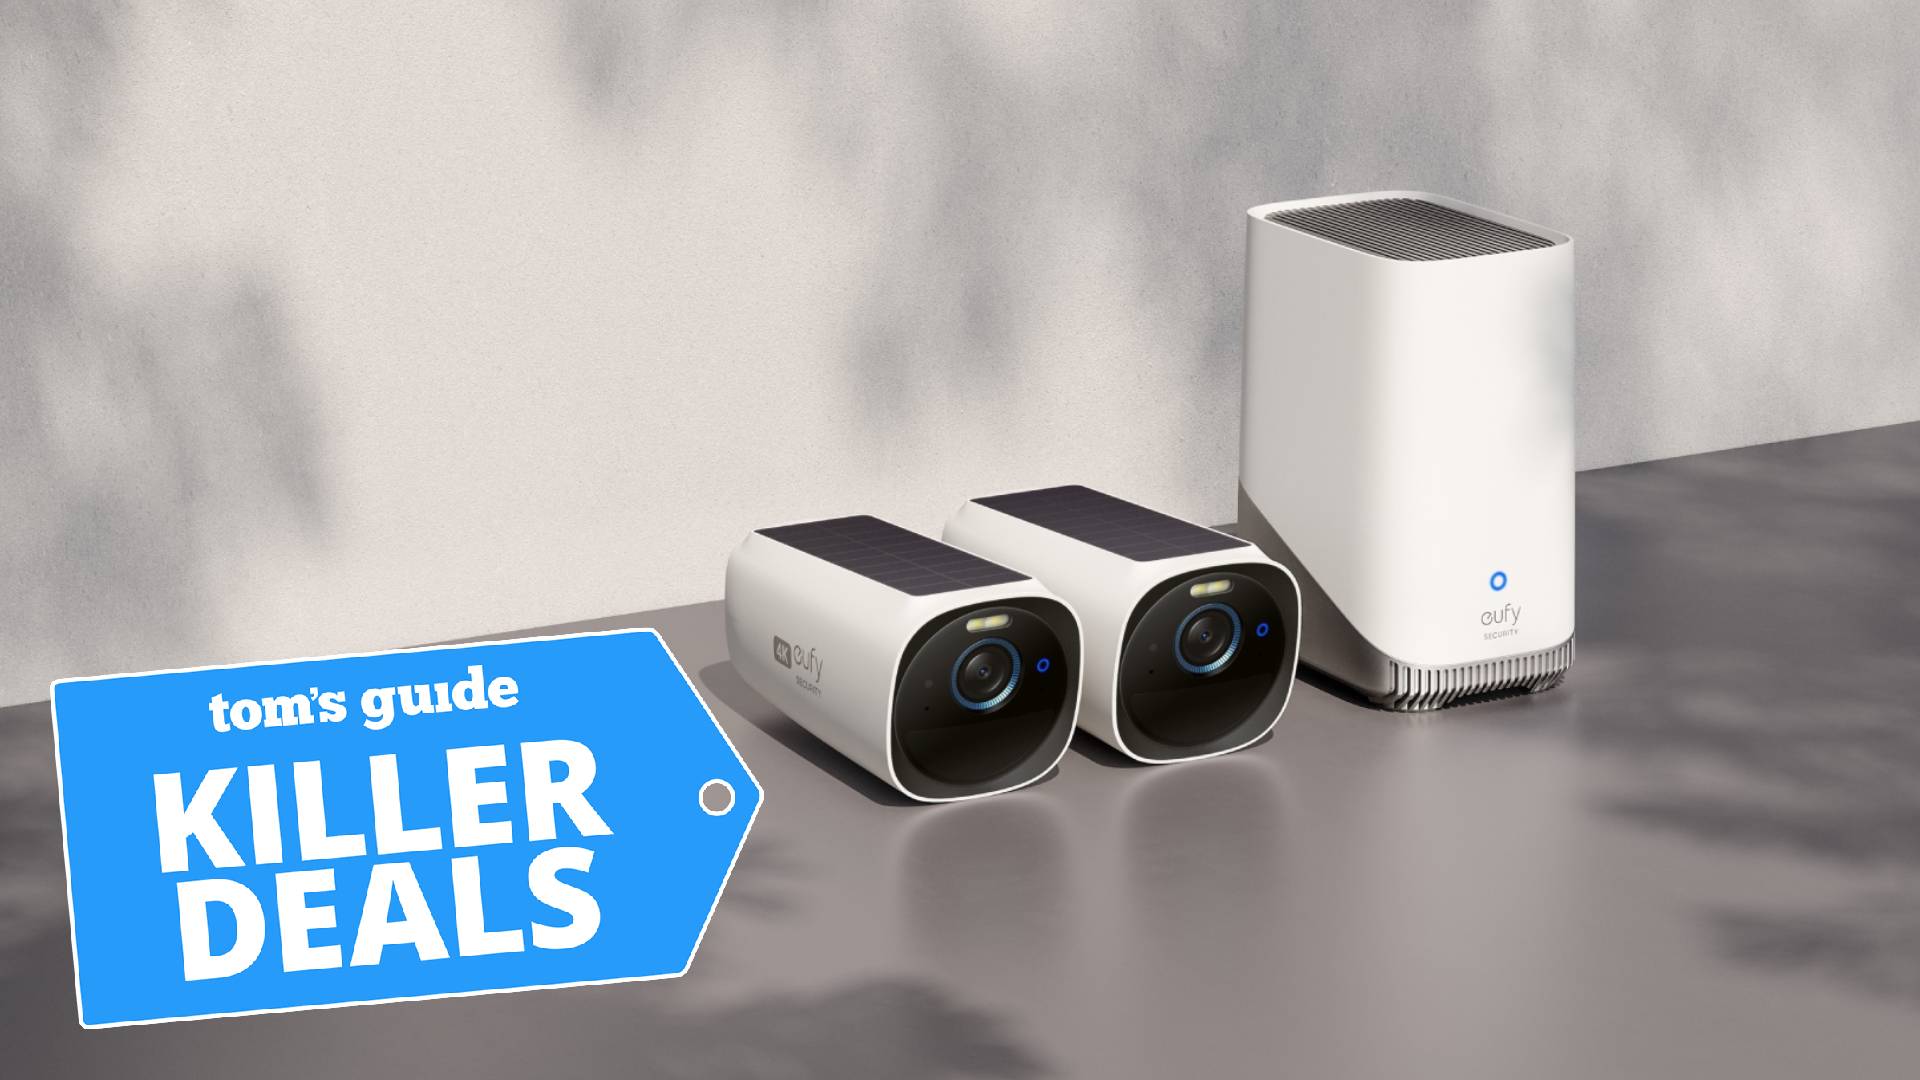 slashes up to 40% off Eufy security cameras